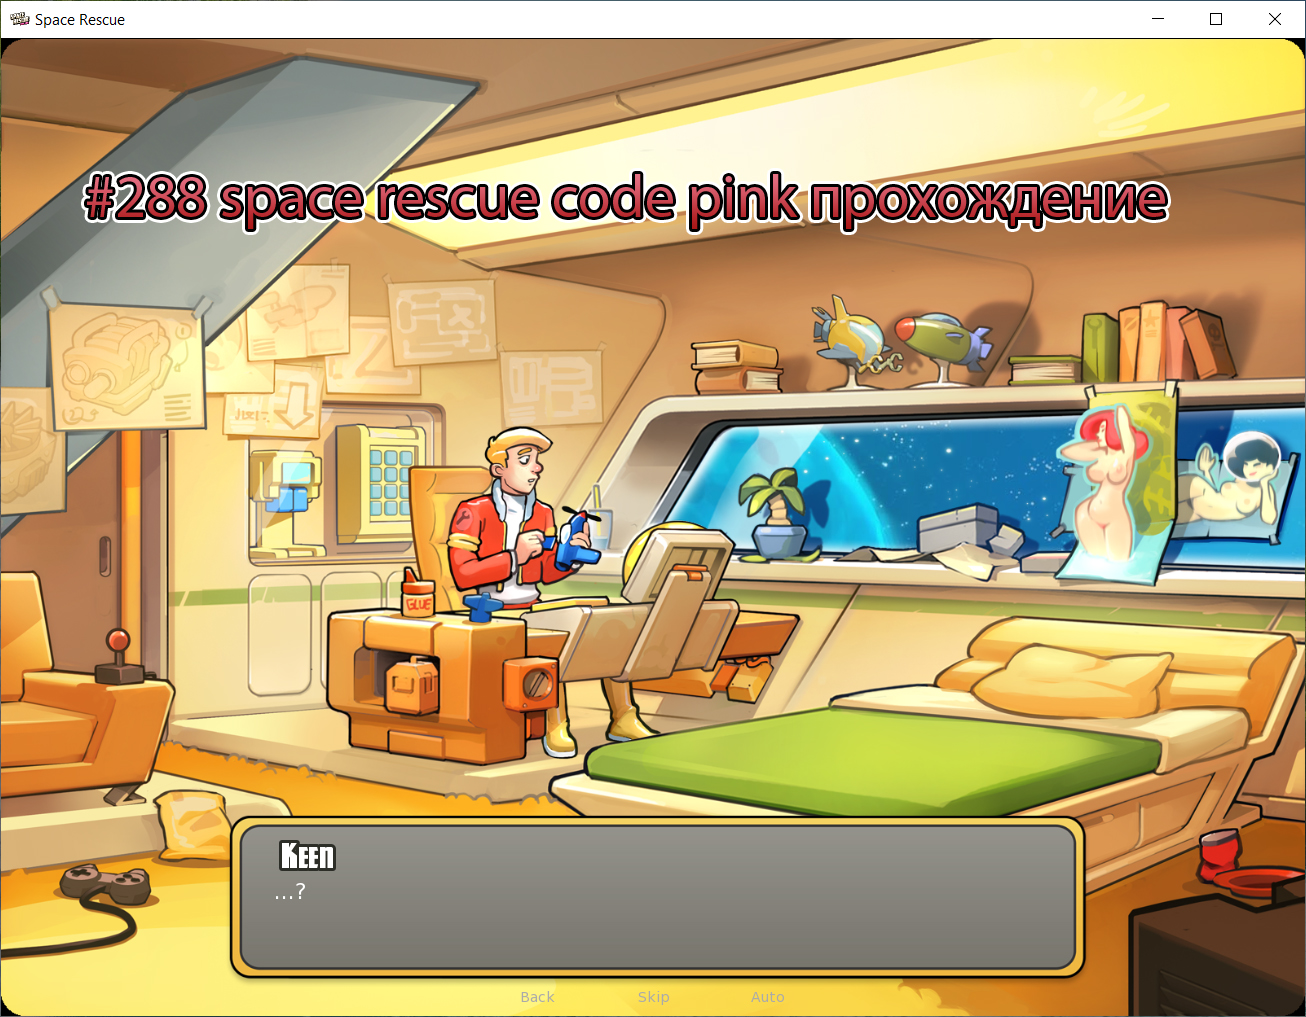    ... #288 space rescue code pink   1